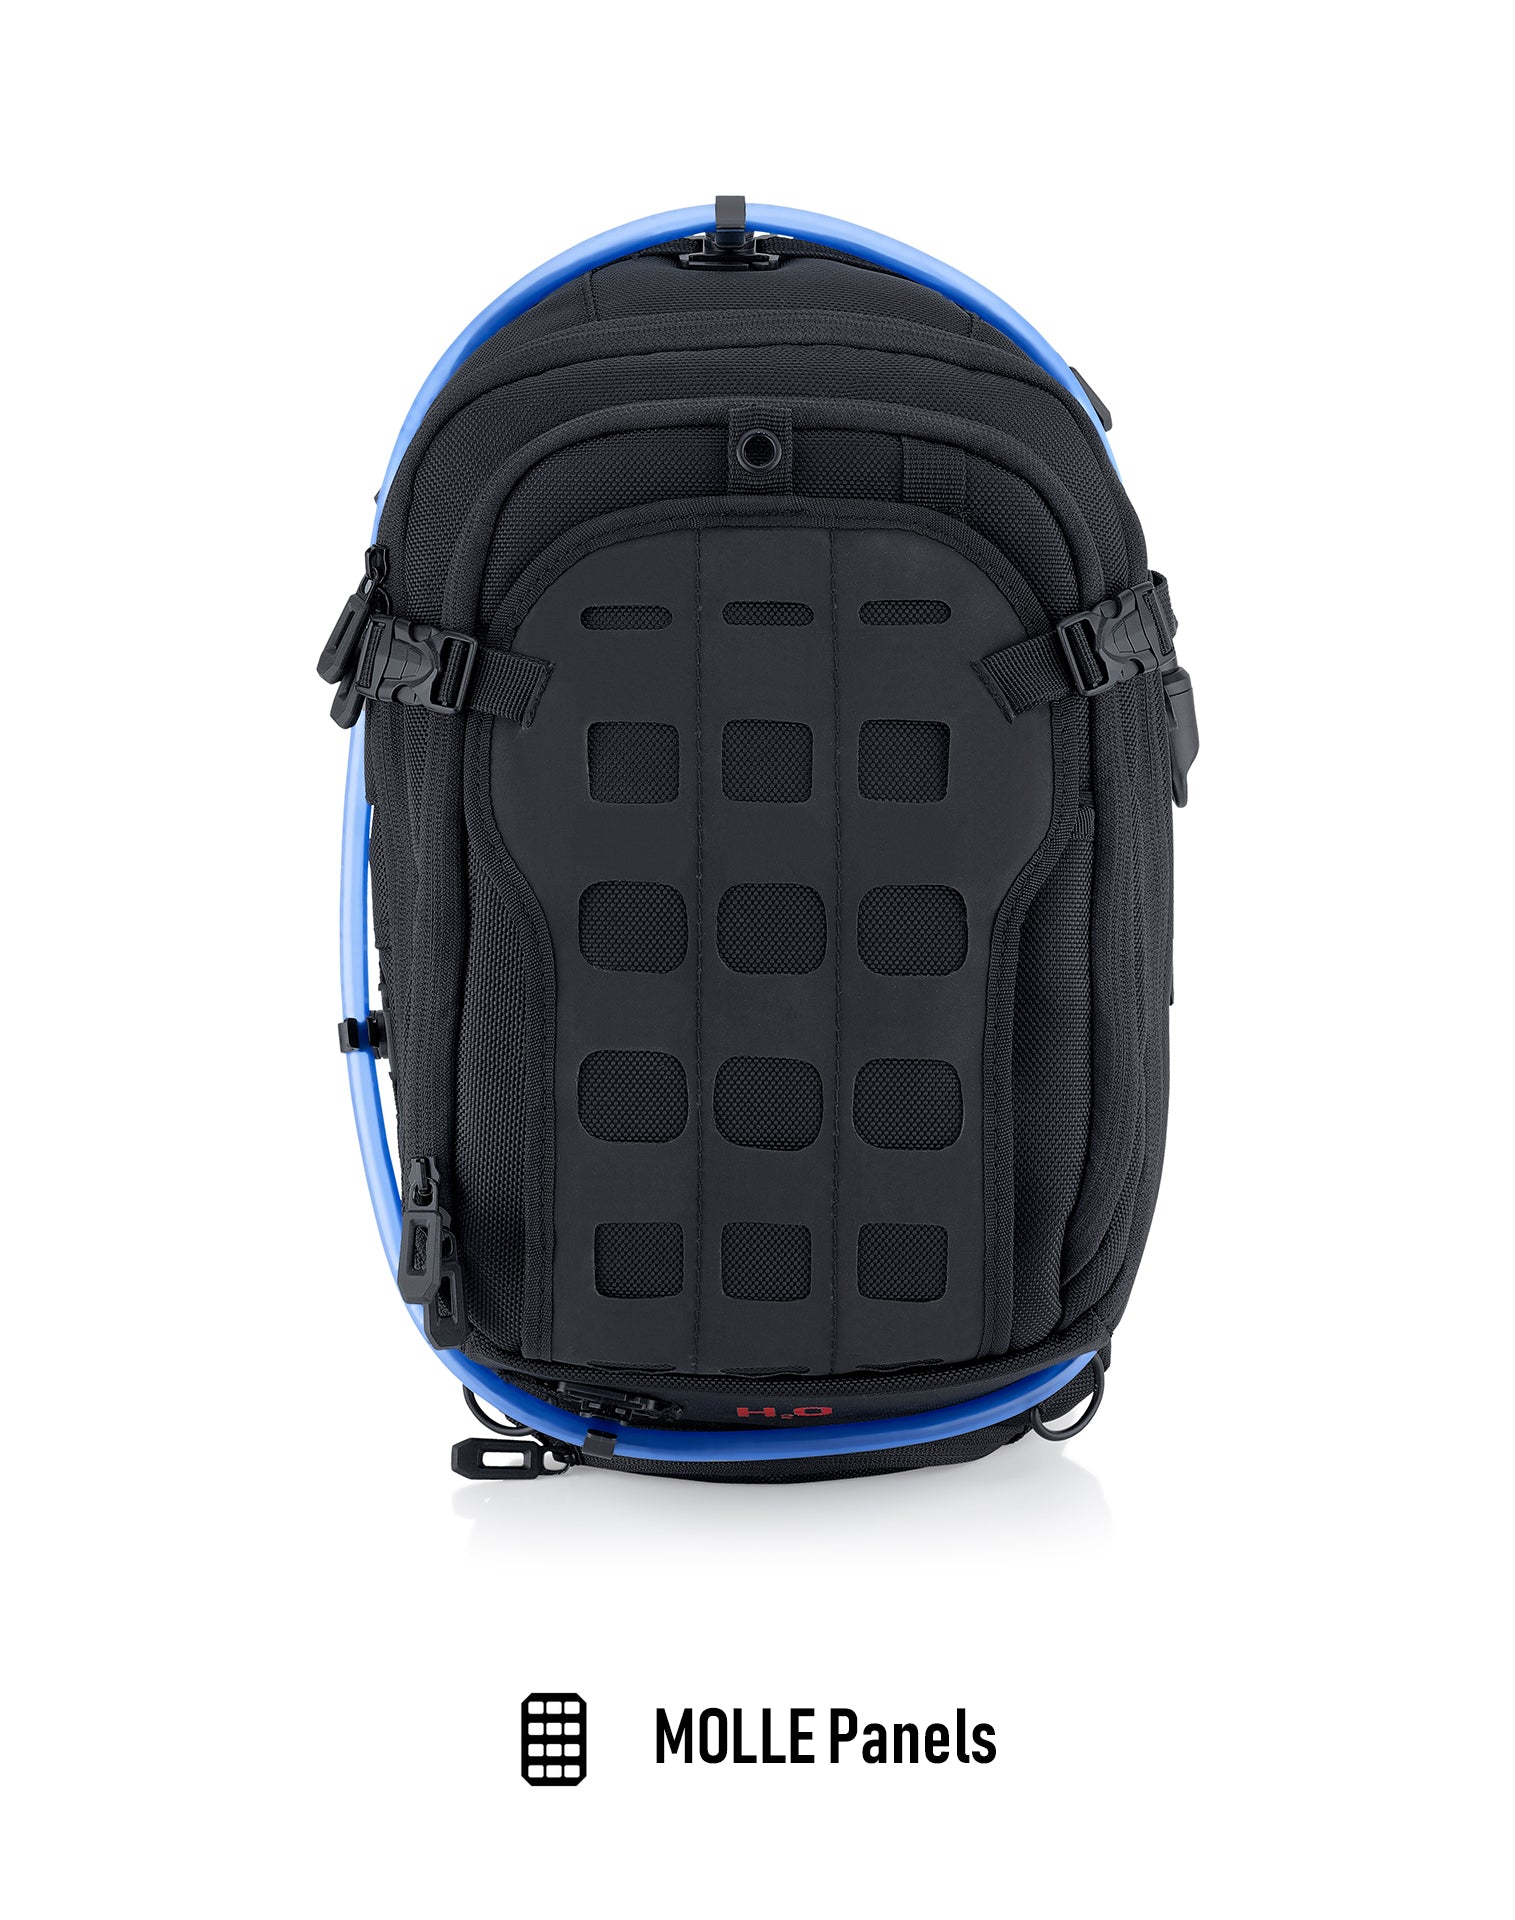 Viking Apex Yamaha ADV Touring Backpack with Hydration Pack